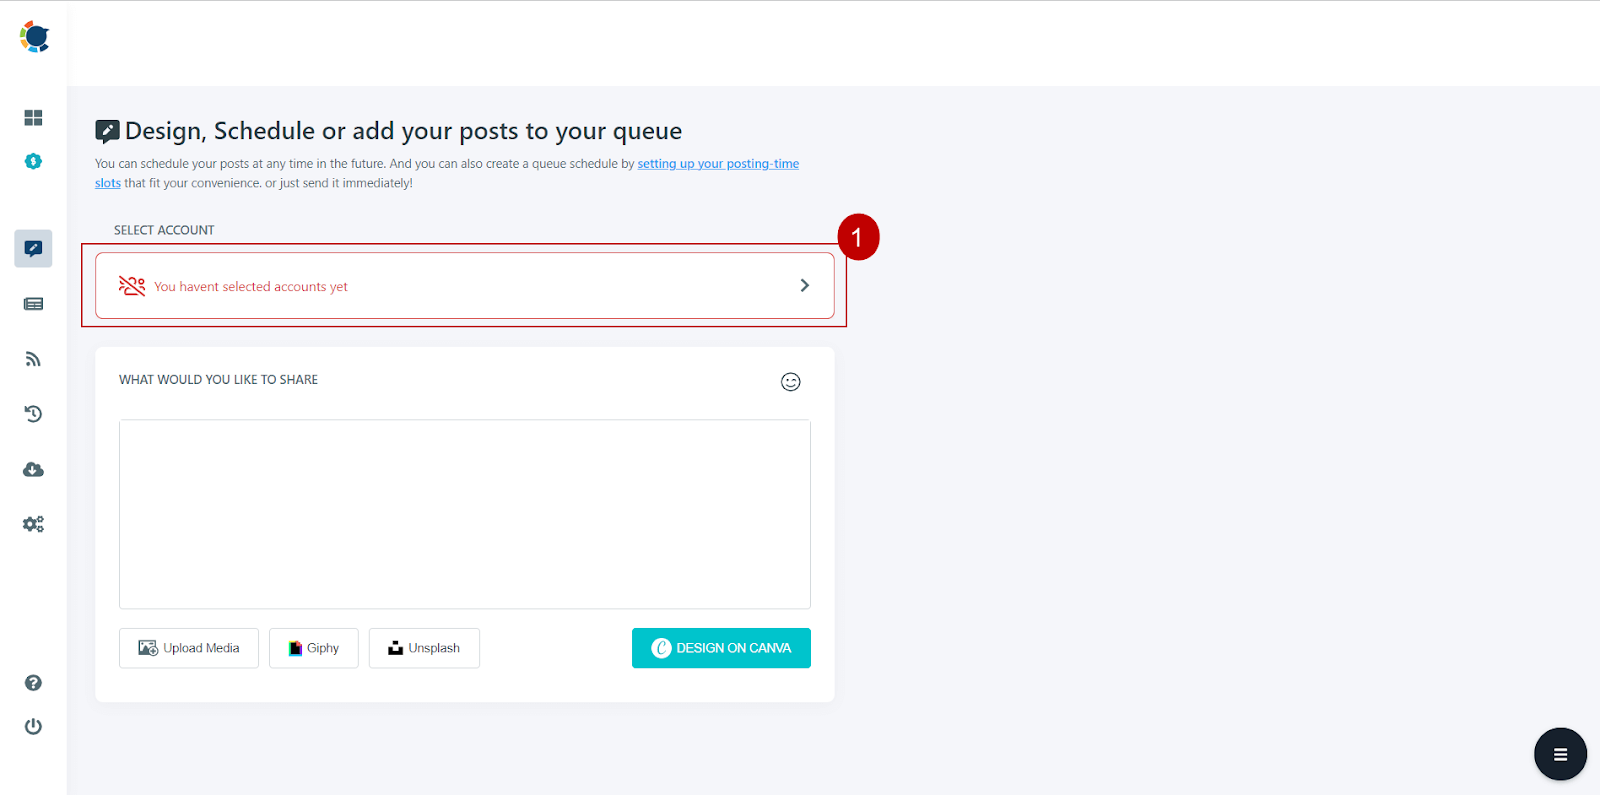 You can select your accounts and use Canva to design social media content that can be used as Instagram thumbnails.